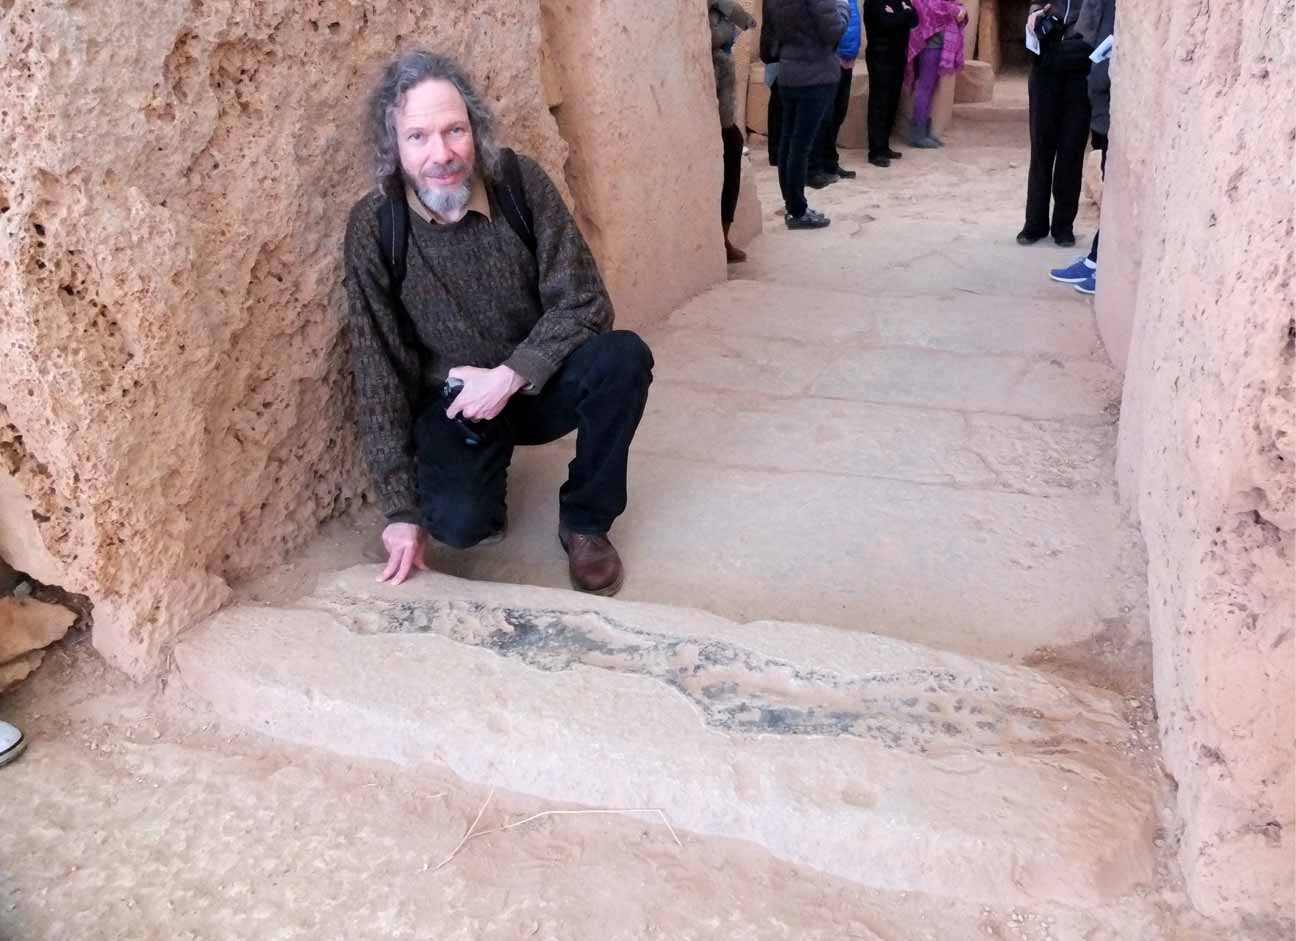 Image of Robert Schoch studying vitrification at the Temple of Mnajdra on Malta